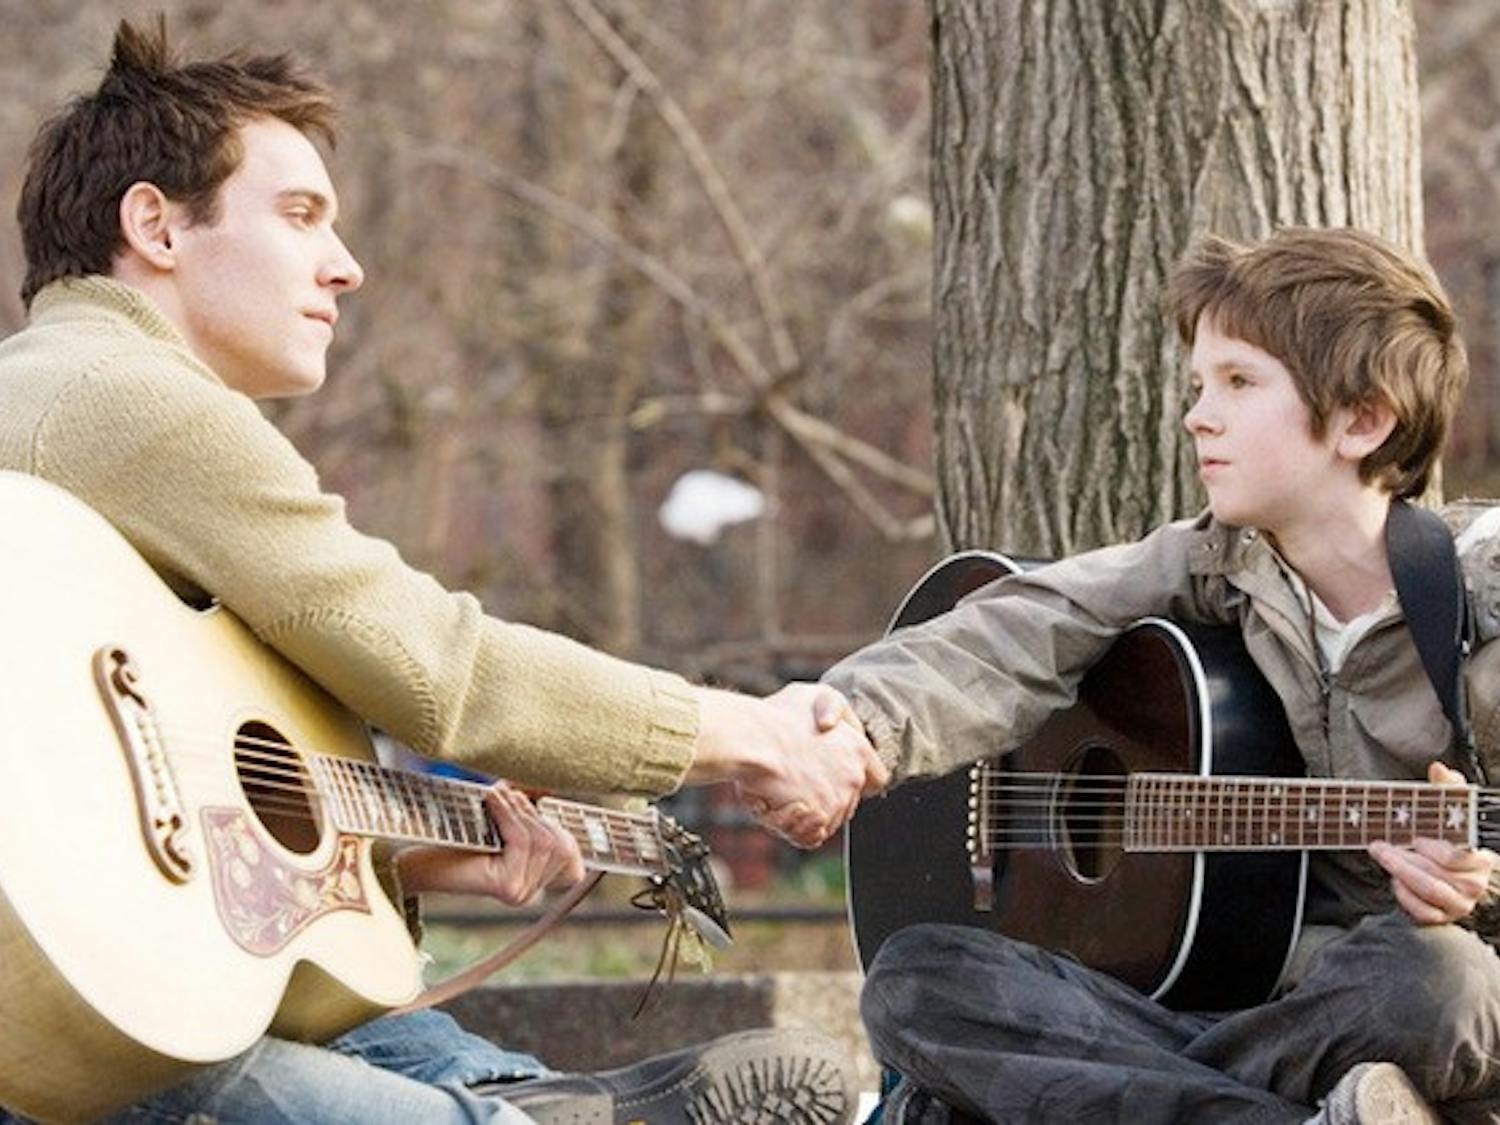 JONATHAN RHYS MEYERS stars as Louis Connelly and FREDDIE HIGHMORE stars as August Rush in Warner Bros. Pictures